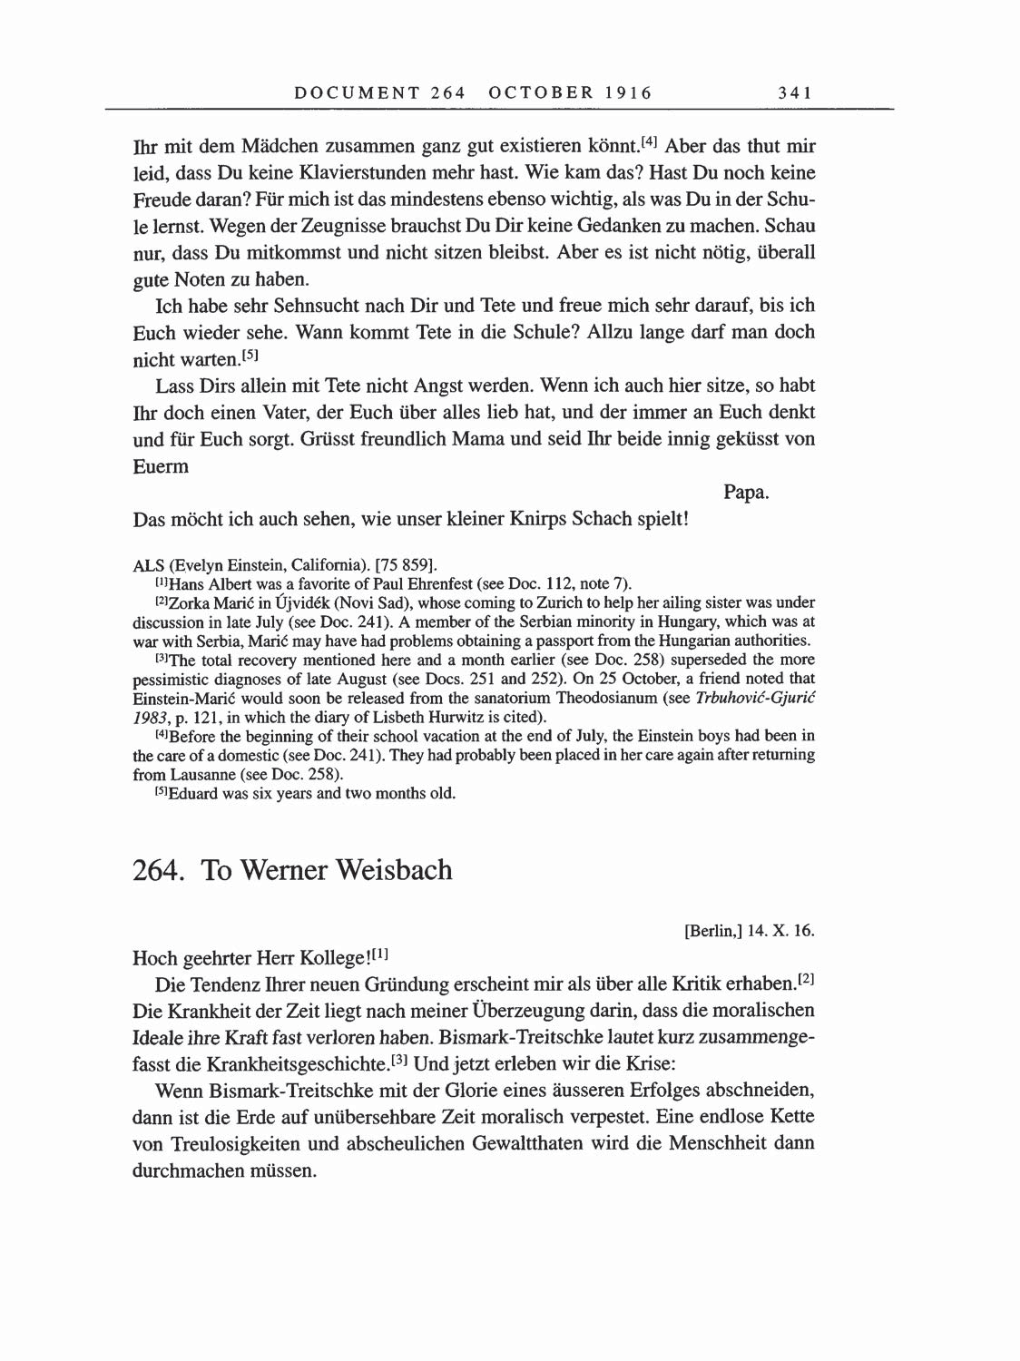 Volume 8, Part A: The Berlin Years: Correspondence 1914-1917 page 341